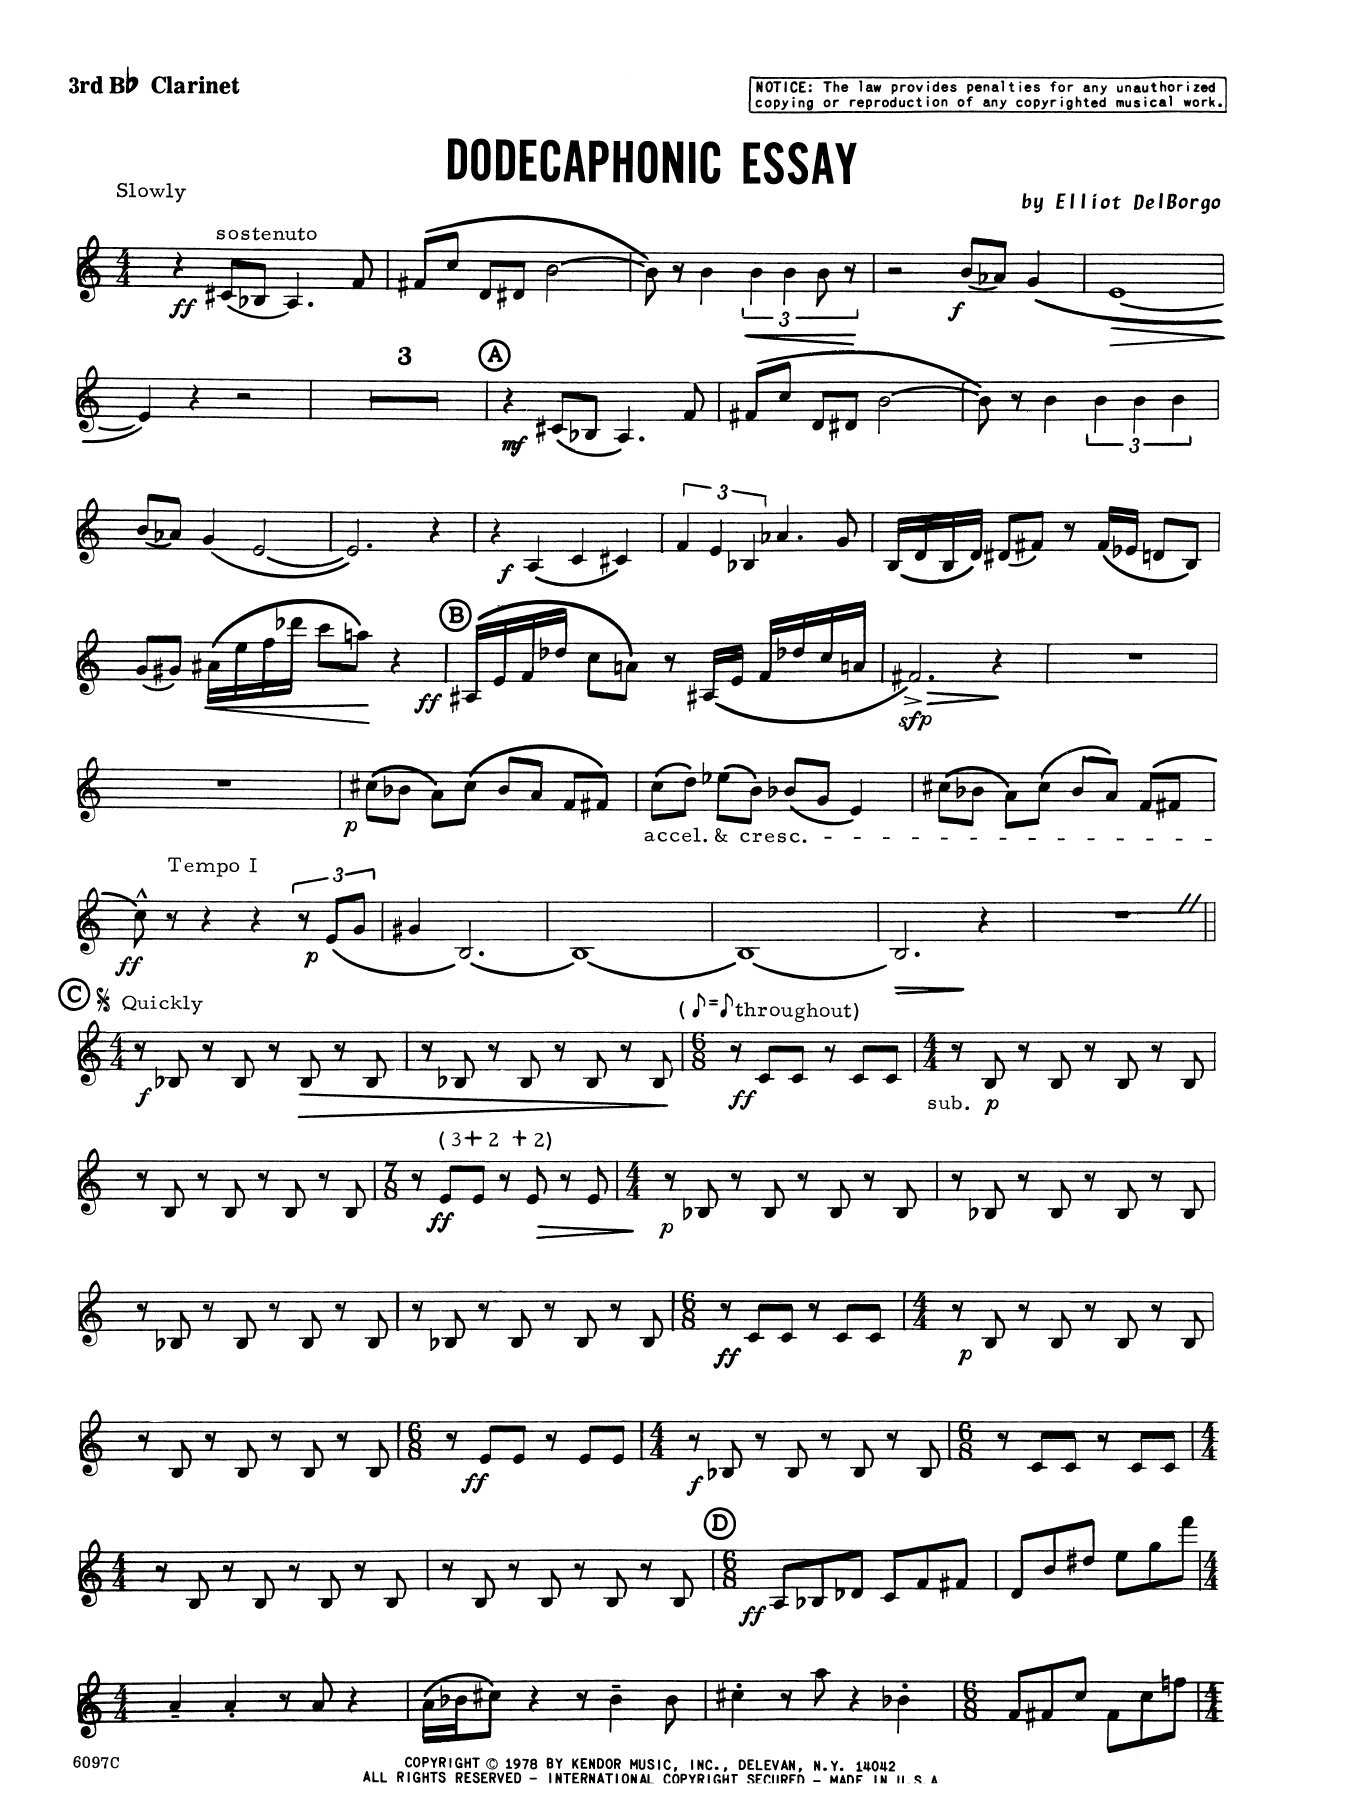 Download Elliot A. Del Borgo Dodecaphonic Essay - 3rd Bb Clarinet Sheet Music